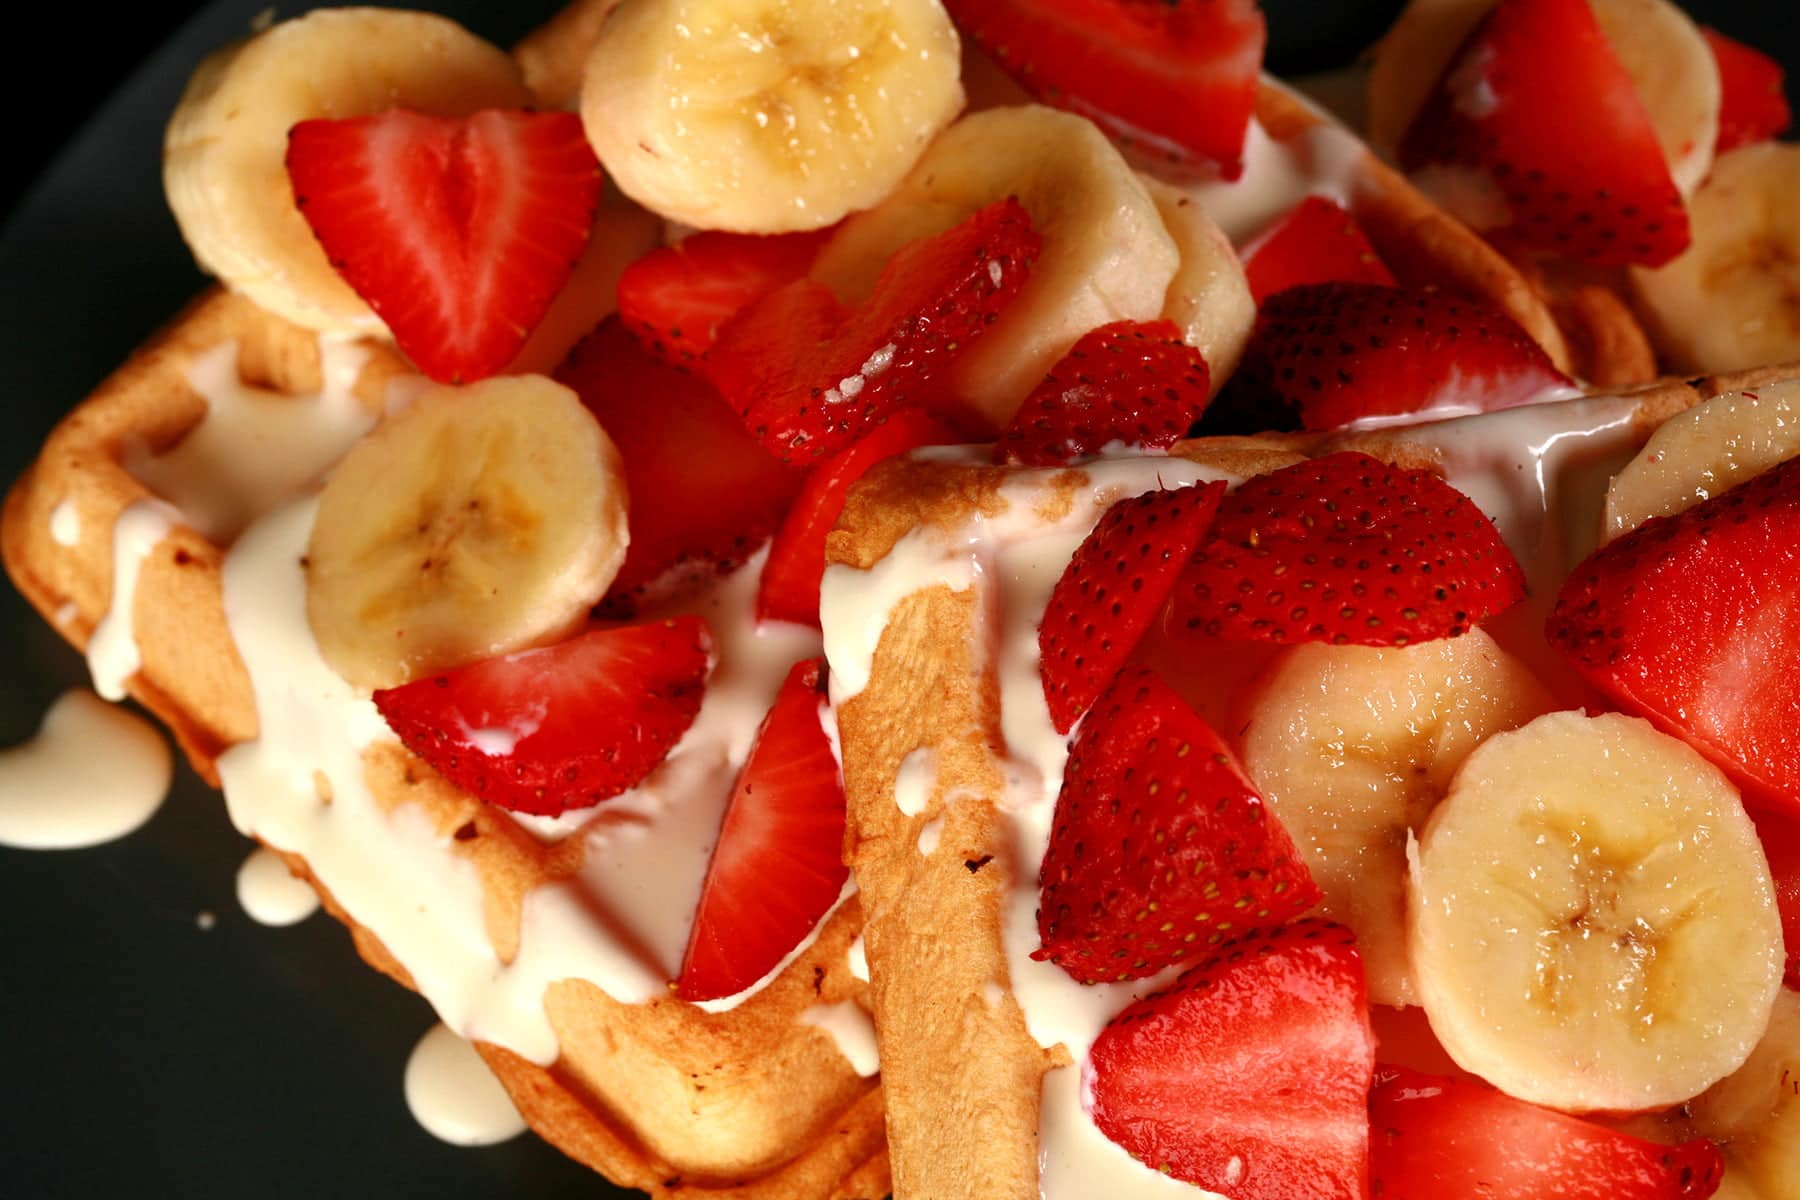 2 Ambrosia Waffles - Belgian waffles with cream cheese sauce, topped with sliced strawberries and sliced bananas - on a blue plate.